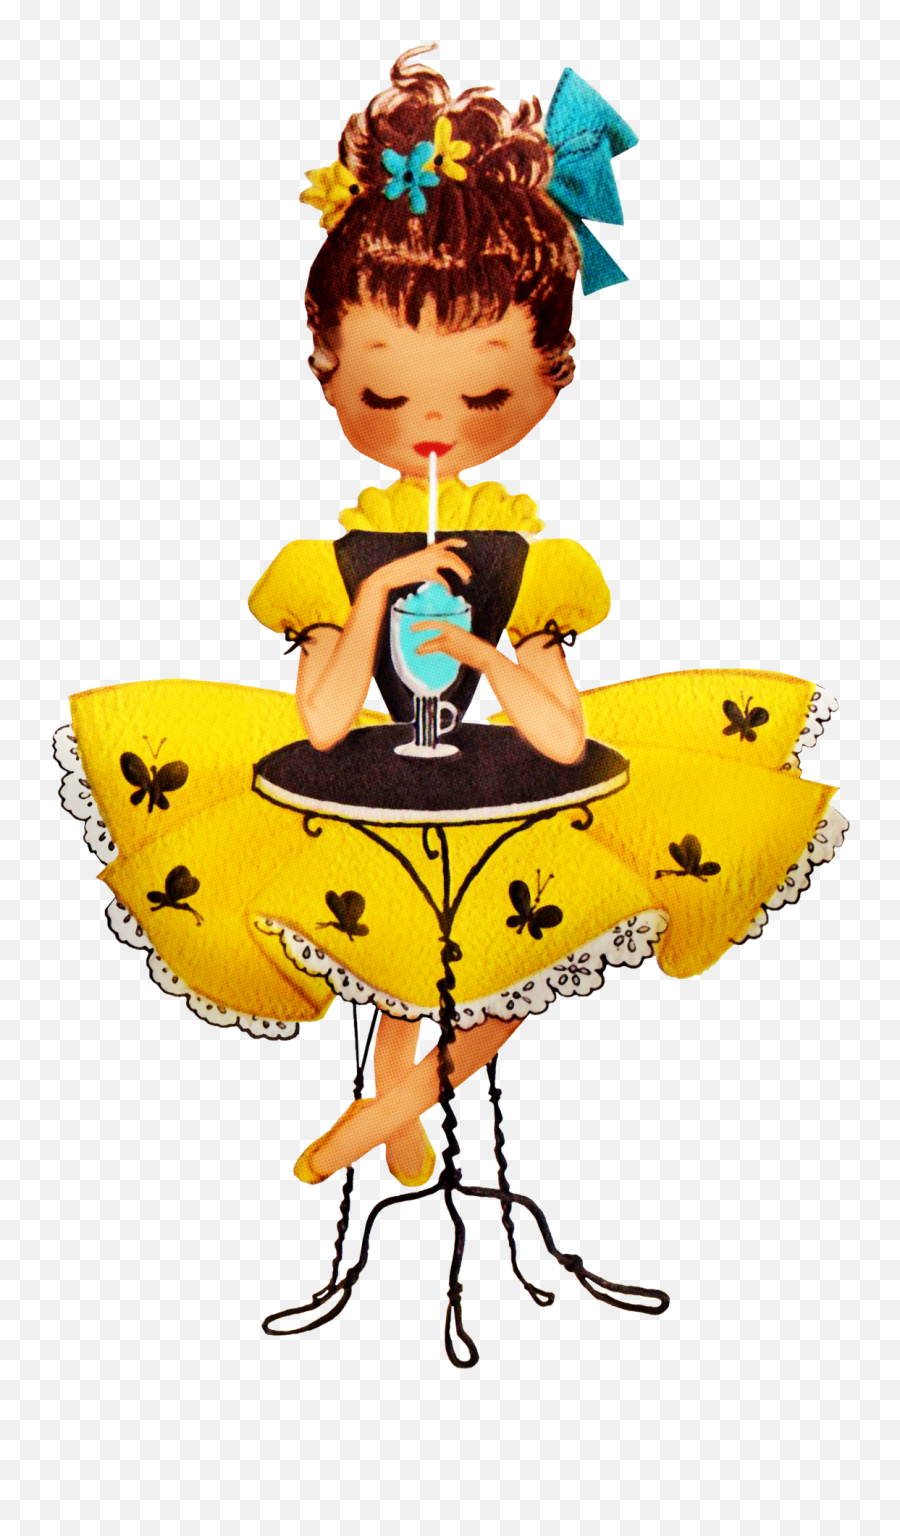 Vintage Girl Restored Clipart Free Stock Photo - Public Emoji,Pin Up Girl Clipart